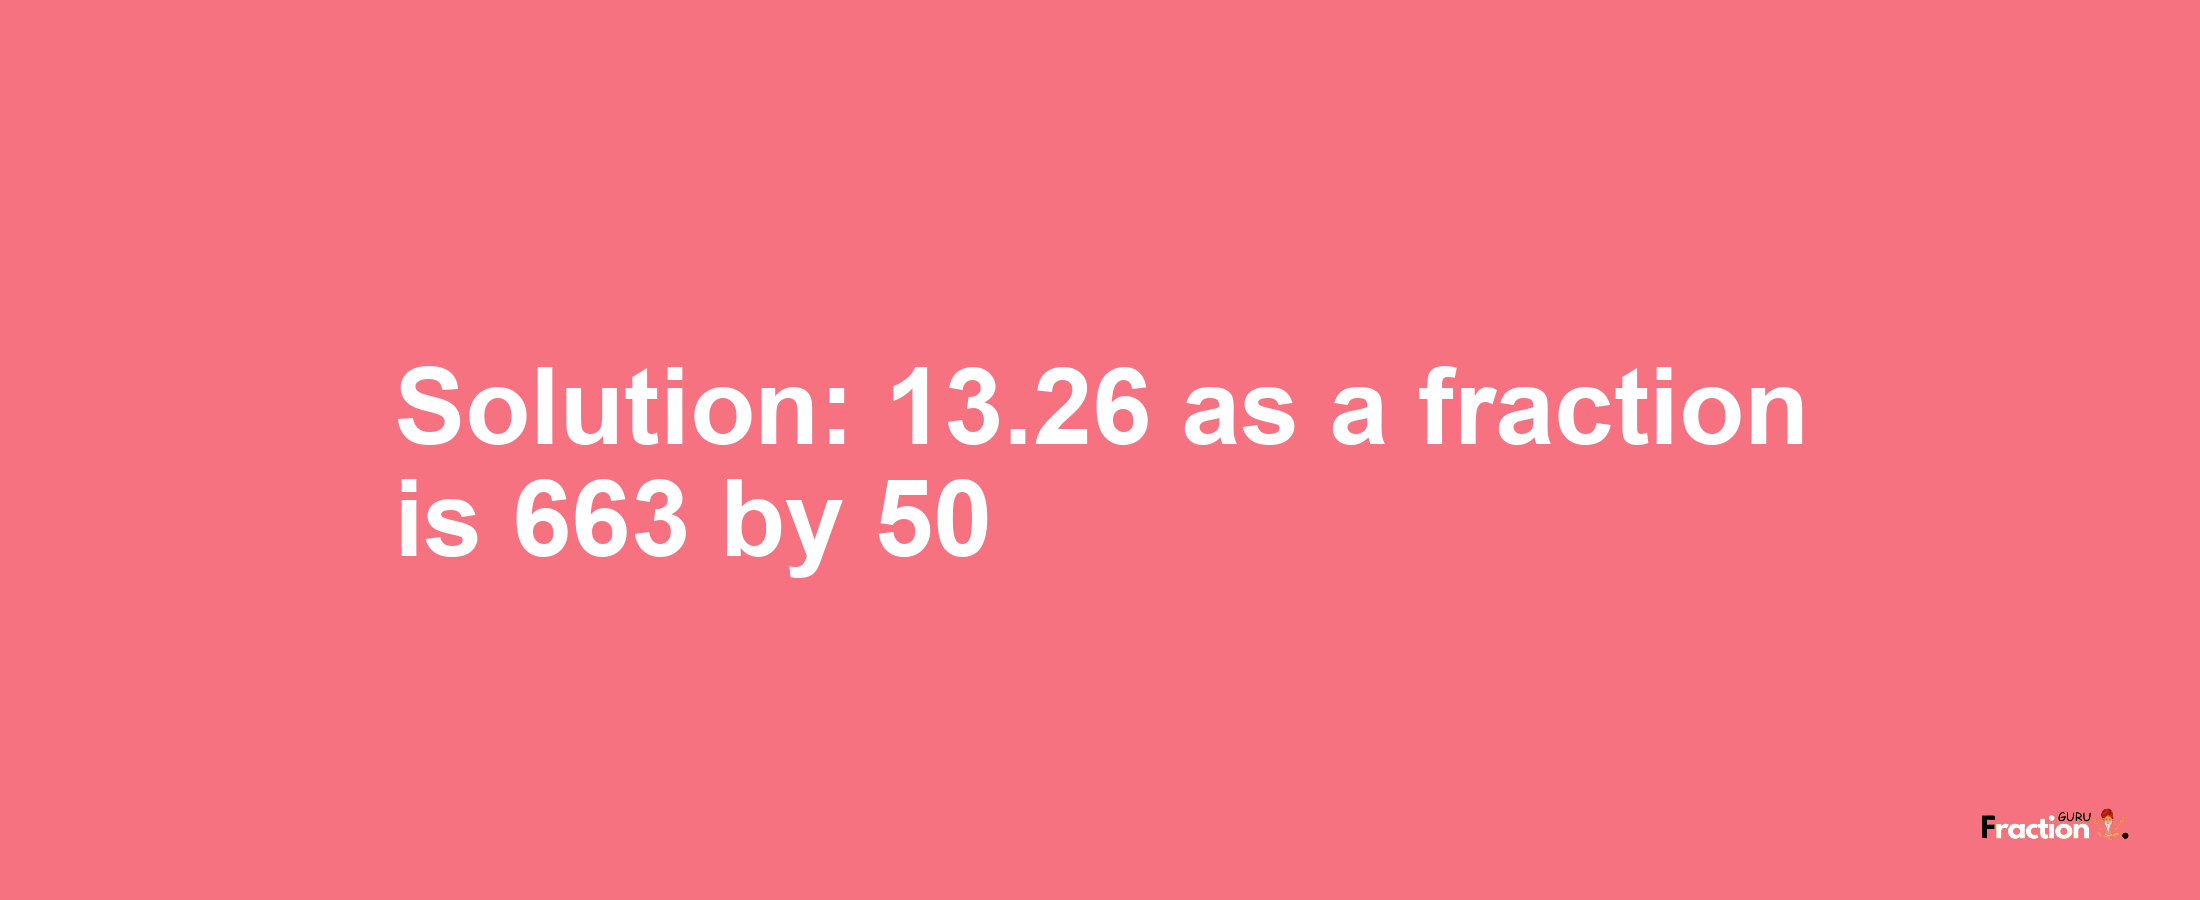 Solution:13.26 as a fraction is 663/50